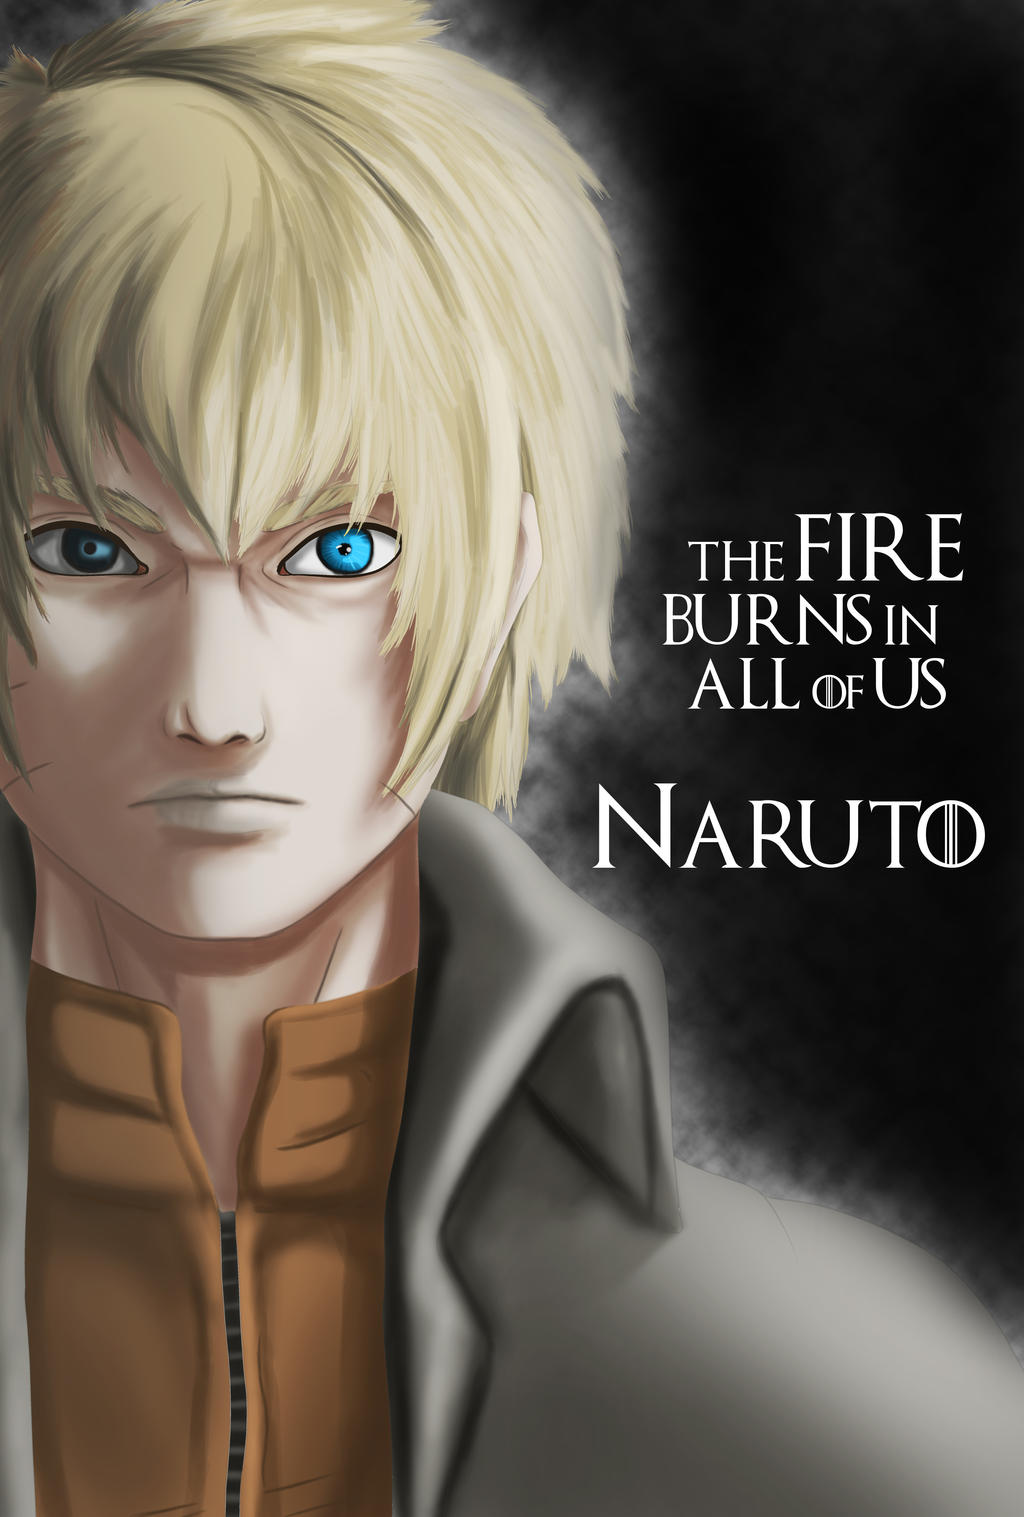 Naruto Game Of Thrones Style By Delaving On Deviantart